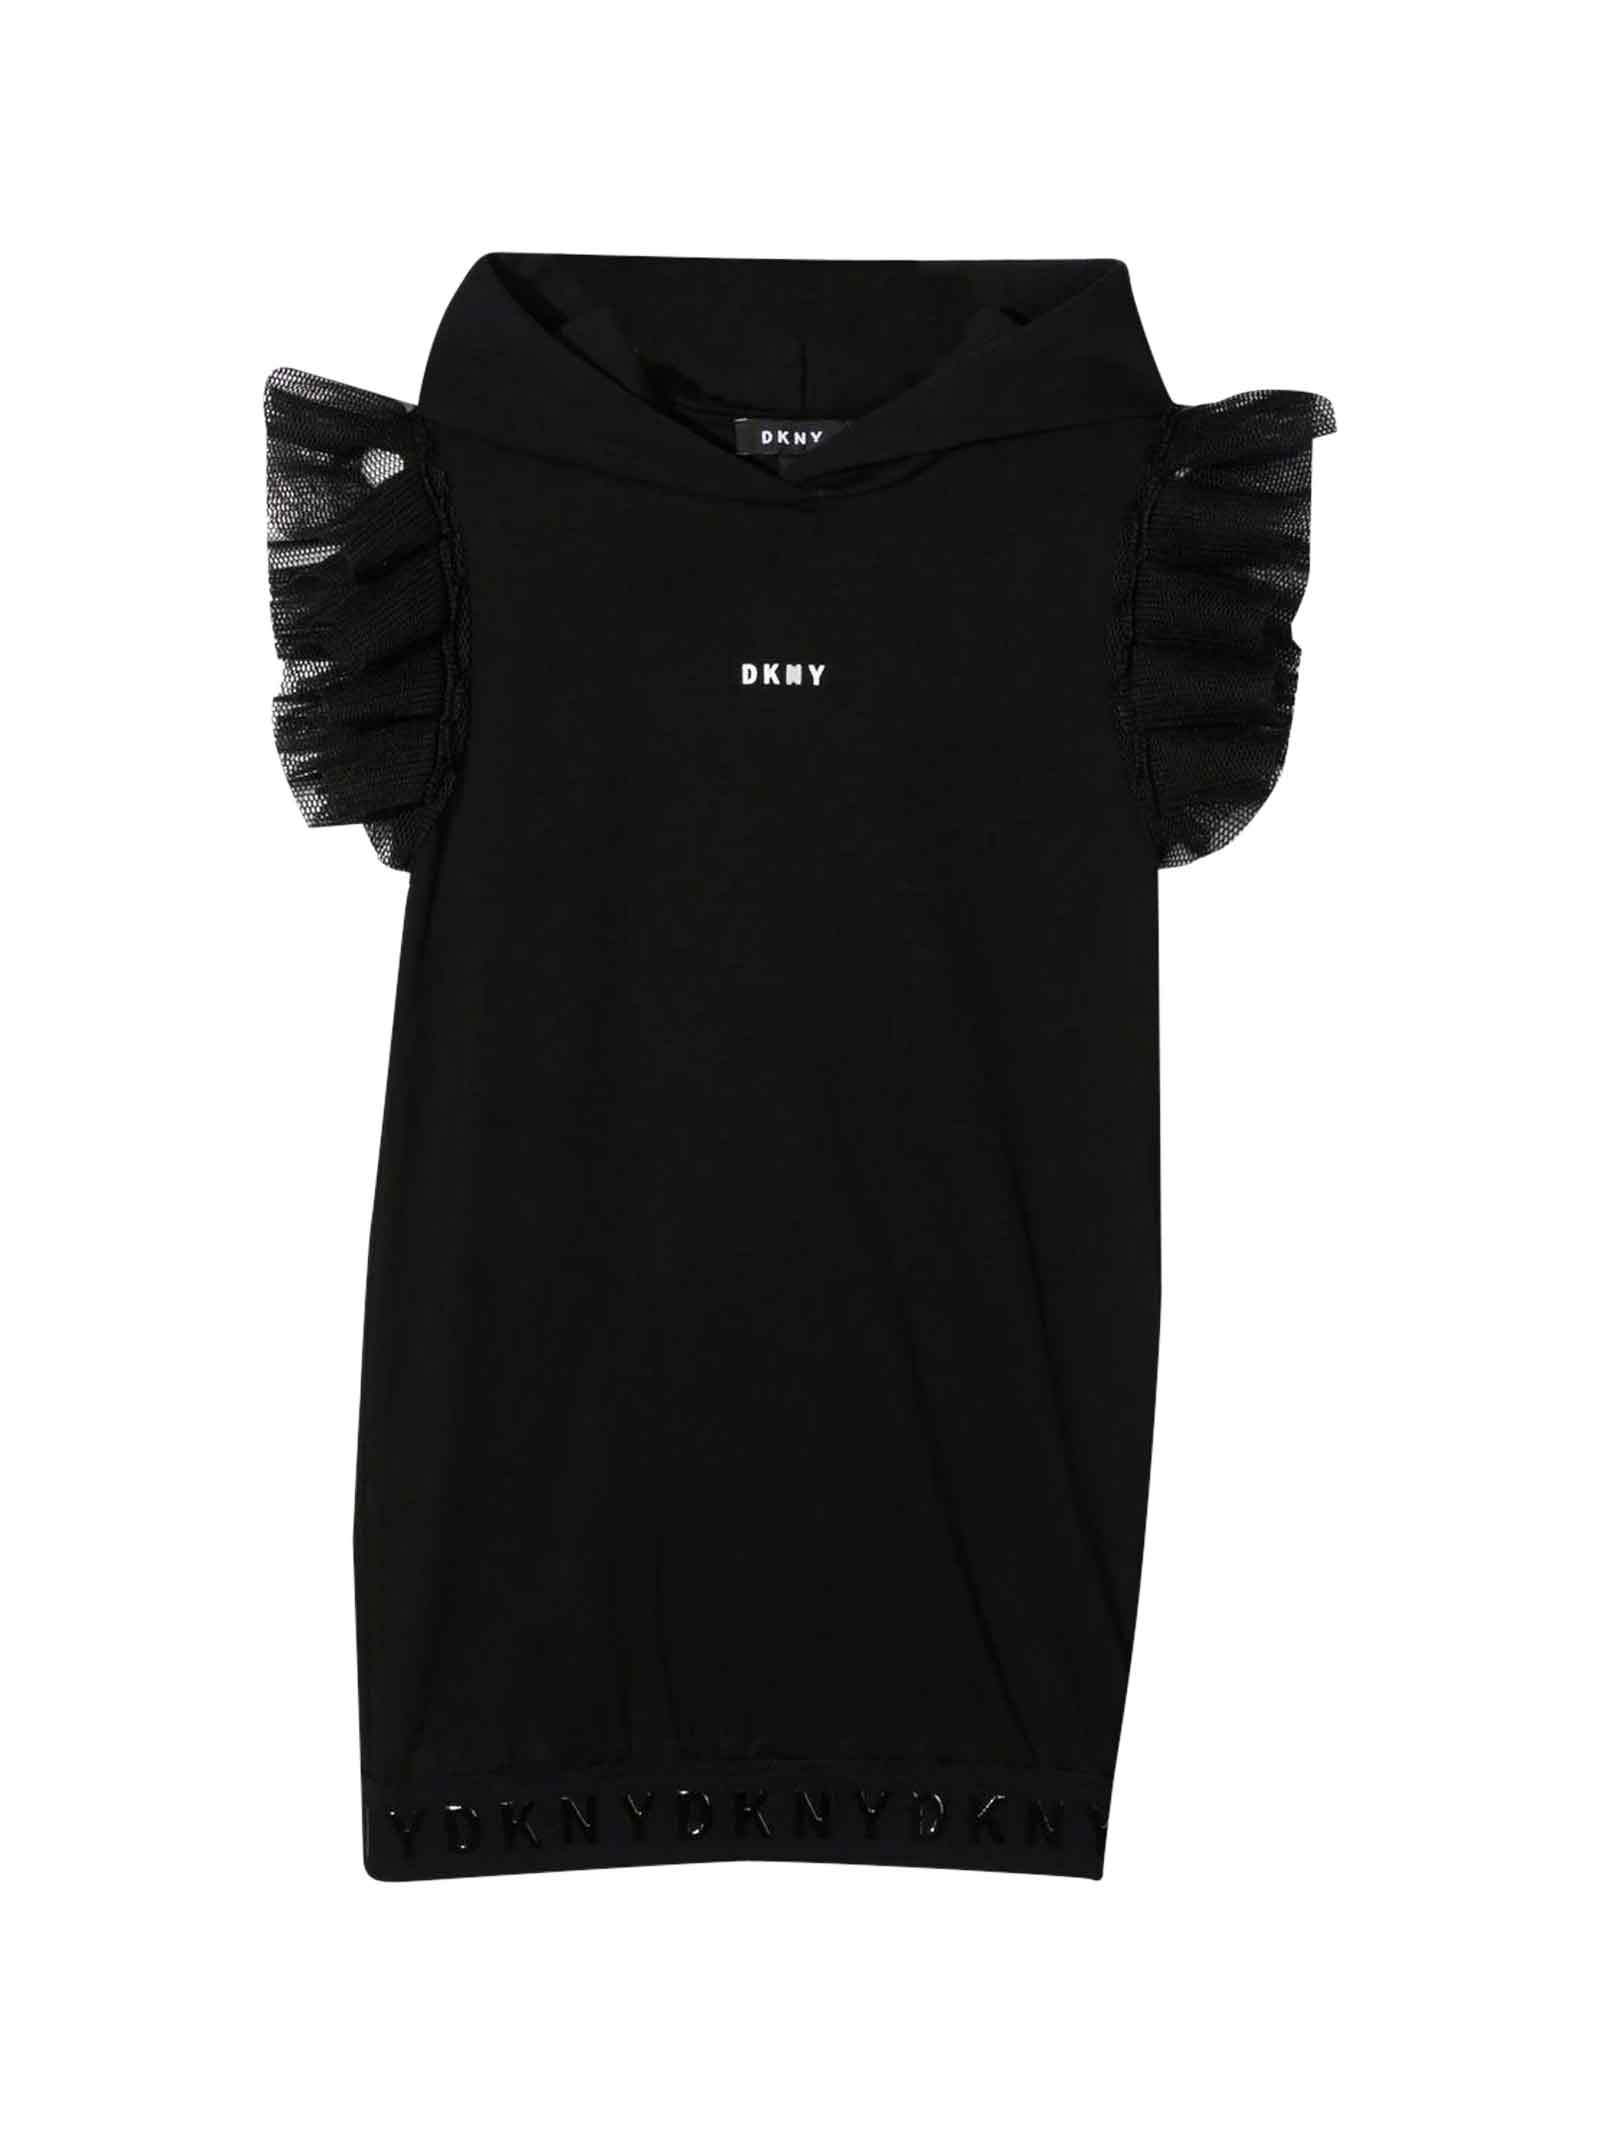 DKNY Black Teen Girl Dress With Rouches